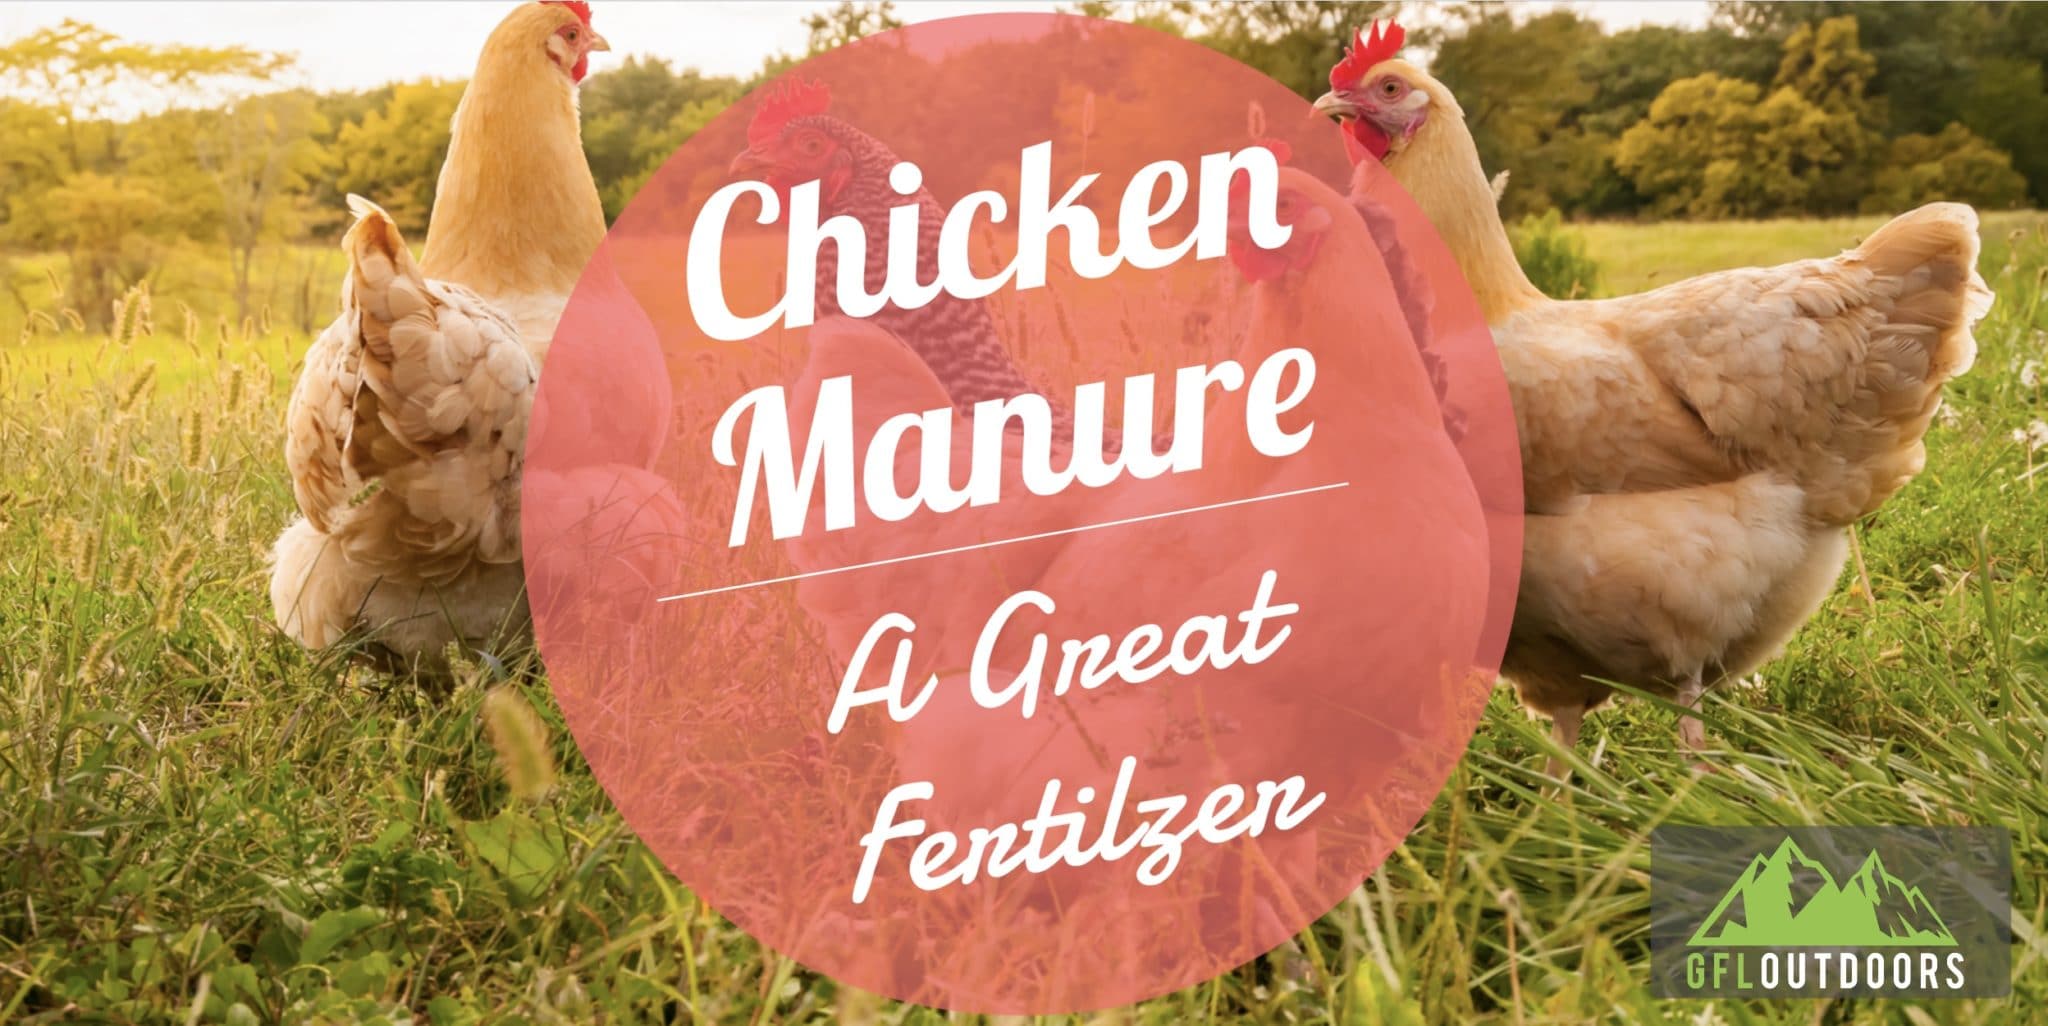 Chicken Manure for Lawns, a Good Choice? - GFL Outdoors